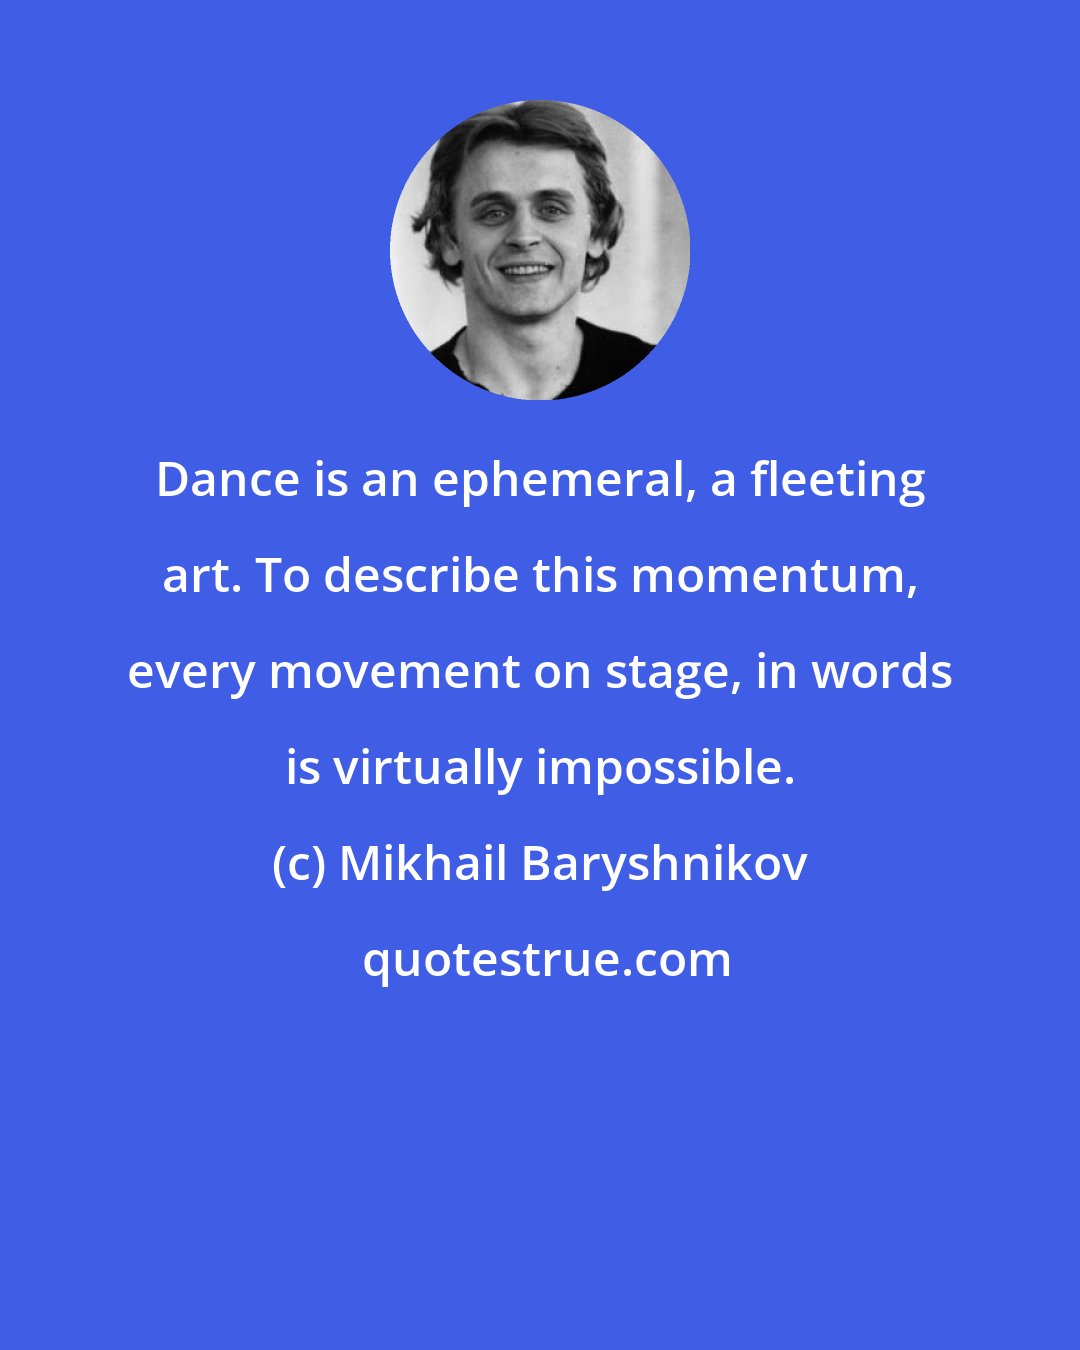 Mikhail Baryshnikov: Dance is an ephemeral, a fleeting art. To describe this momentum, every movement on stage, in words is virtually impossible.